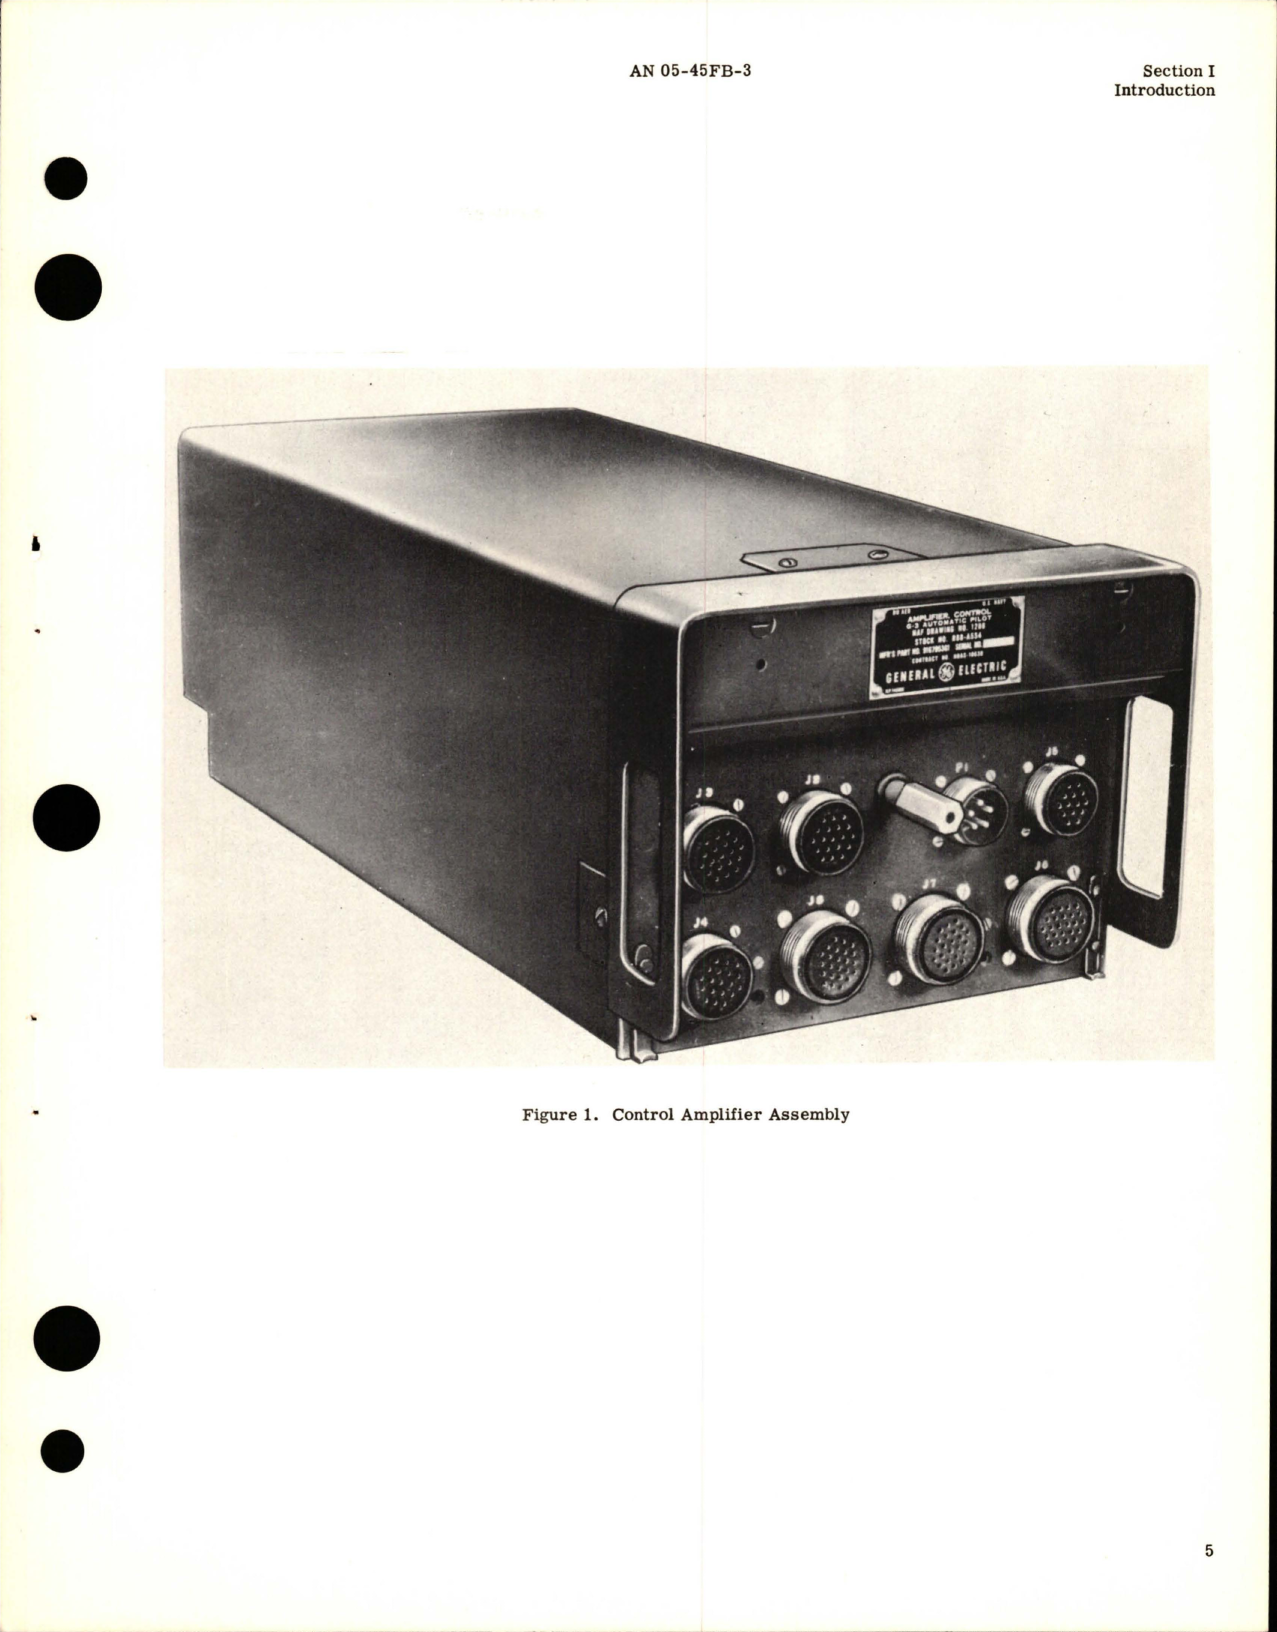 Sample page 7 from AirCorps Library document: Illustrated Parts Breakdown for Control Amplifier and Power Adapter for G-3 Auto Pilot Models 2CJ4B1and 2CJ4B3